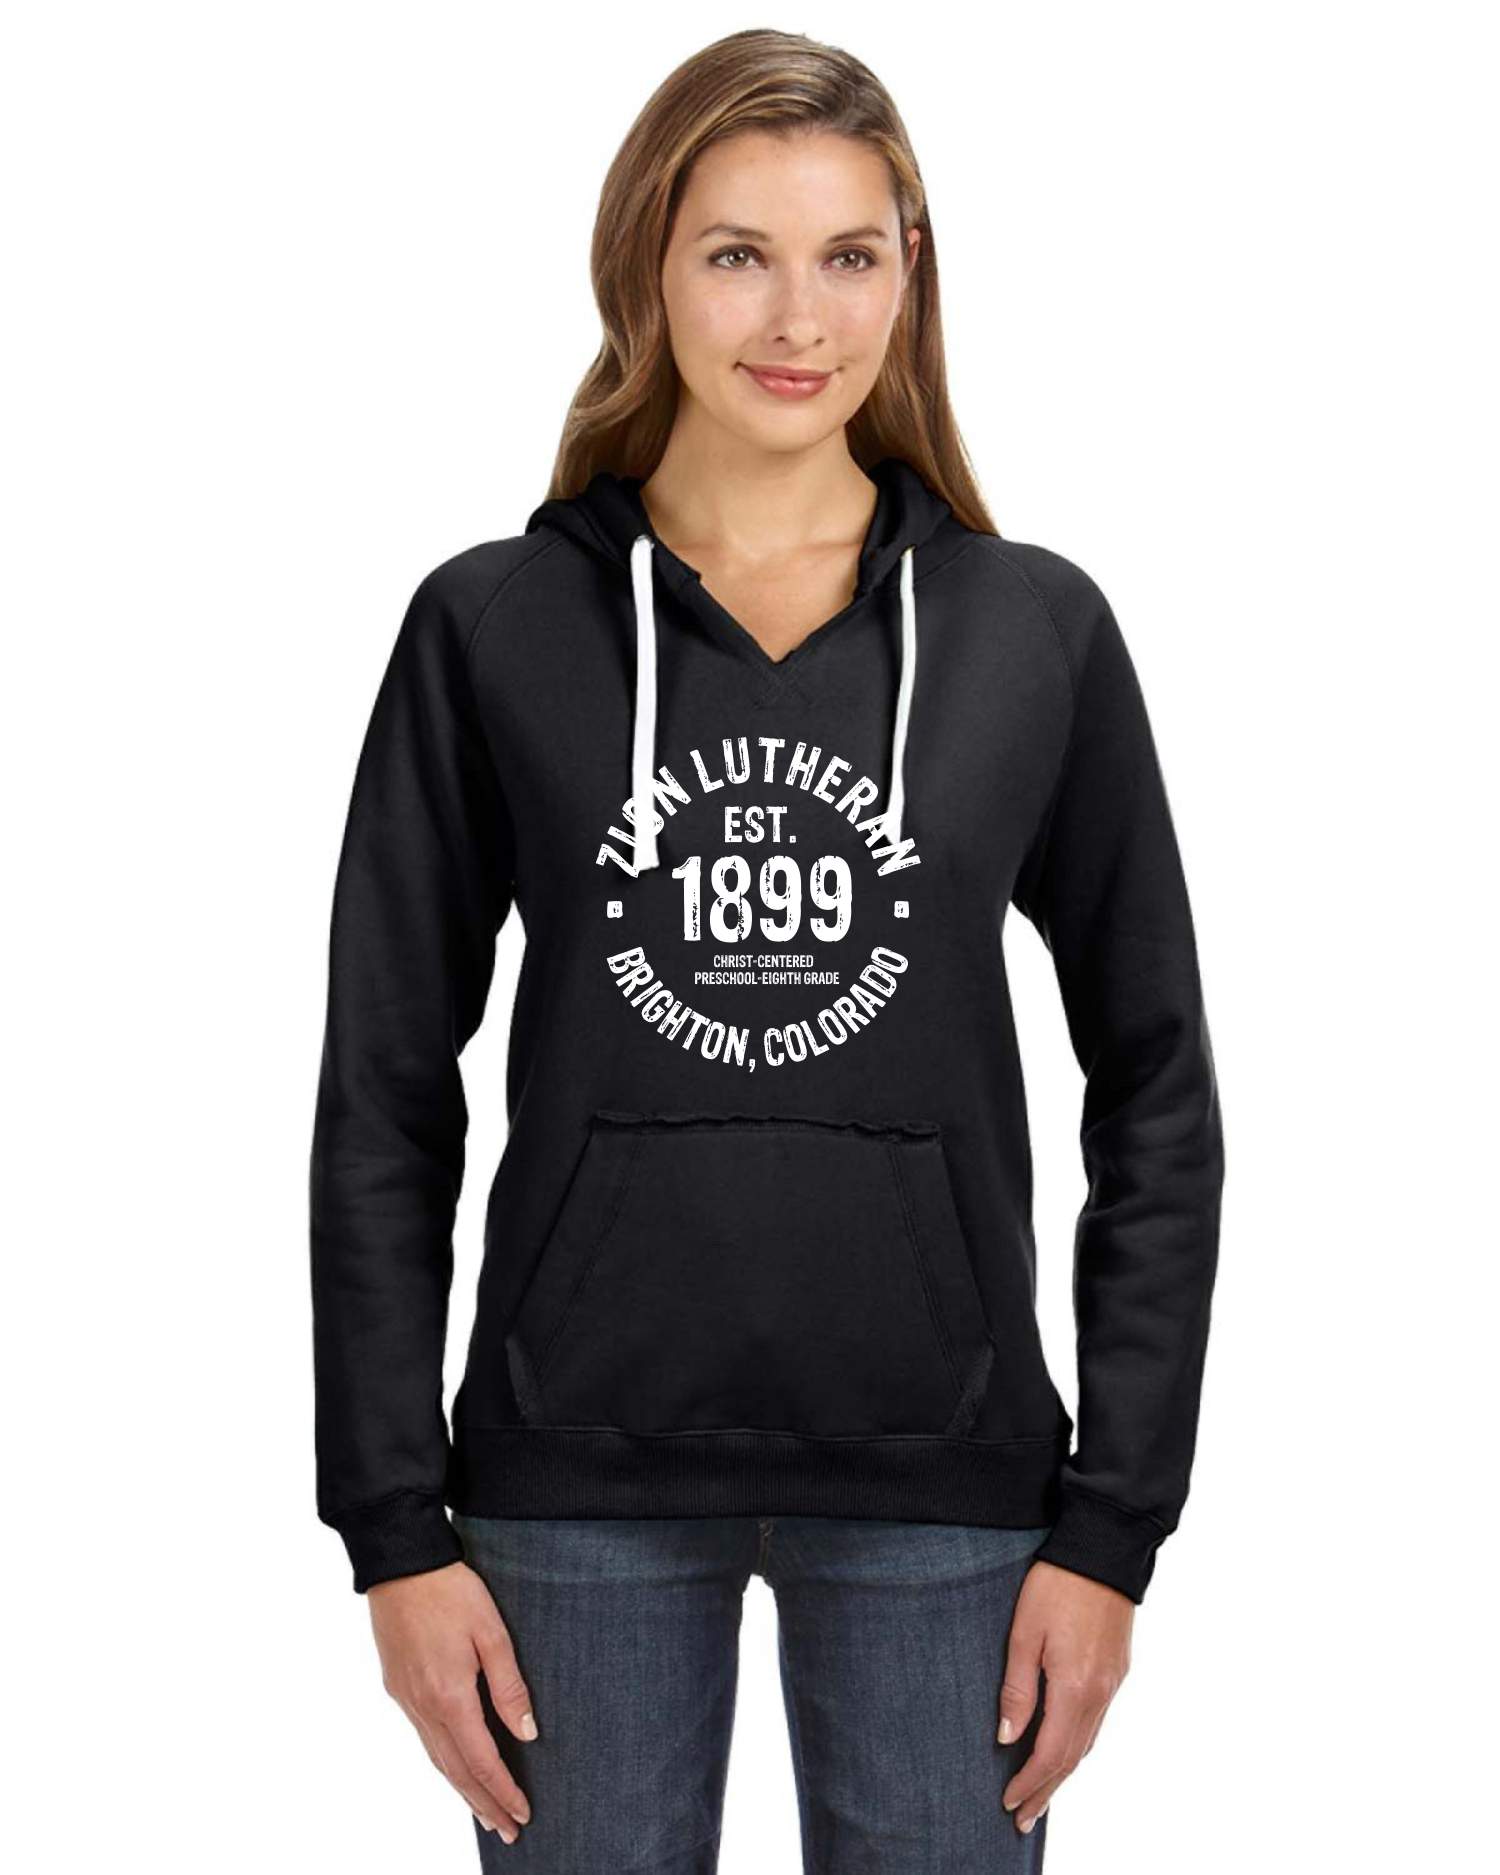 Zion Ladies V Neck Ultra Soft Hoodie with Emblem or 1899 - Kanizzle